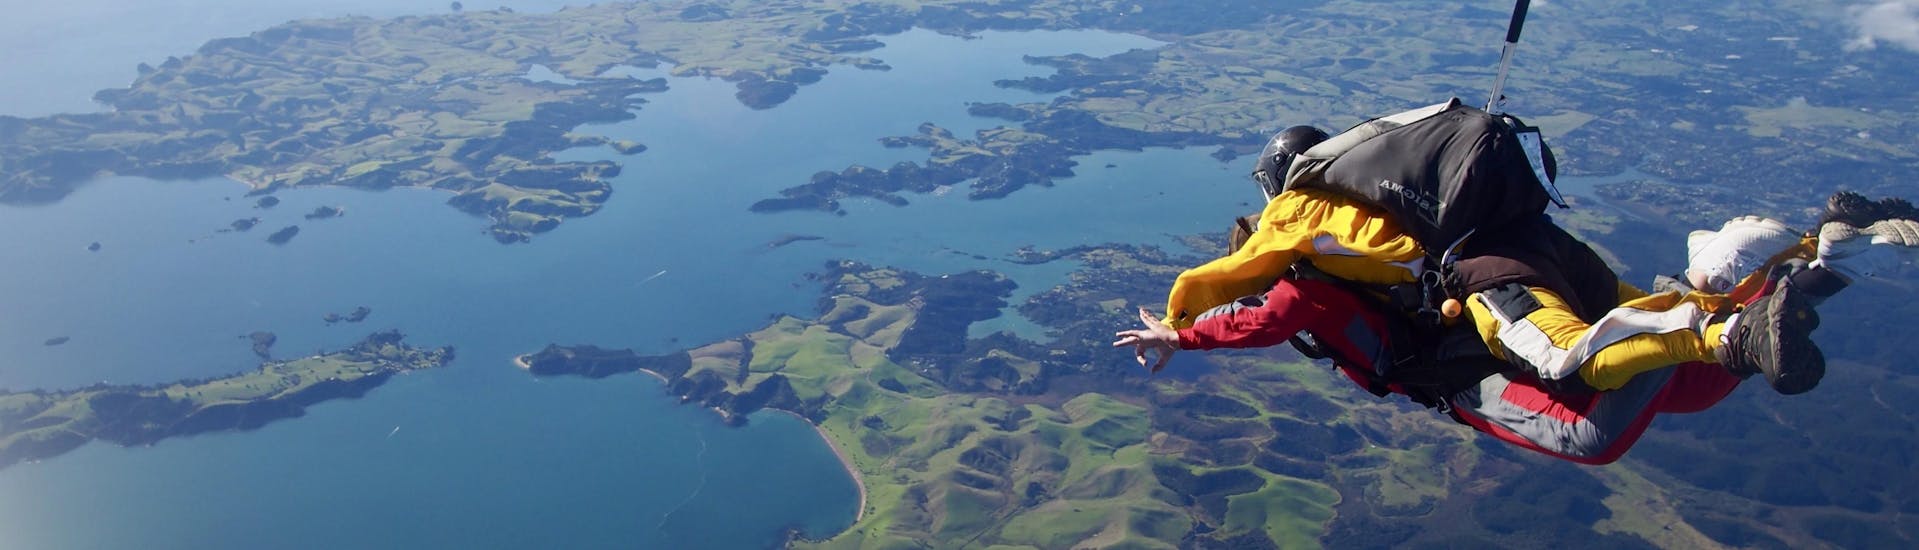 A participant of the skydive organized by Skydive Bay of Islands is living the time of her life in Bay of Islands.